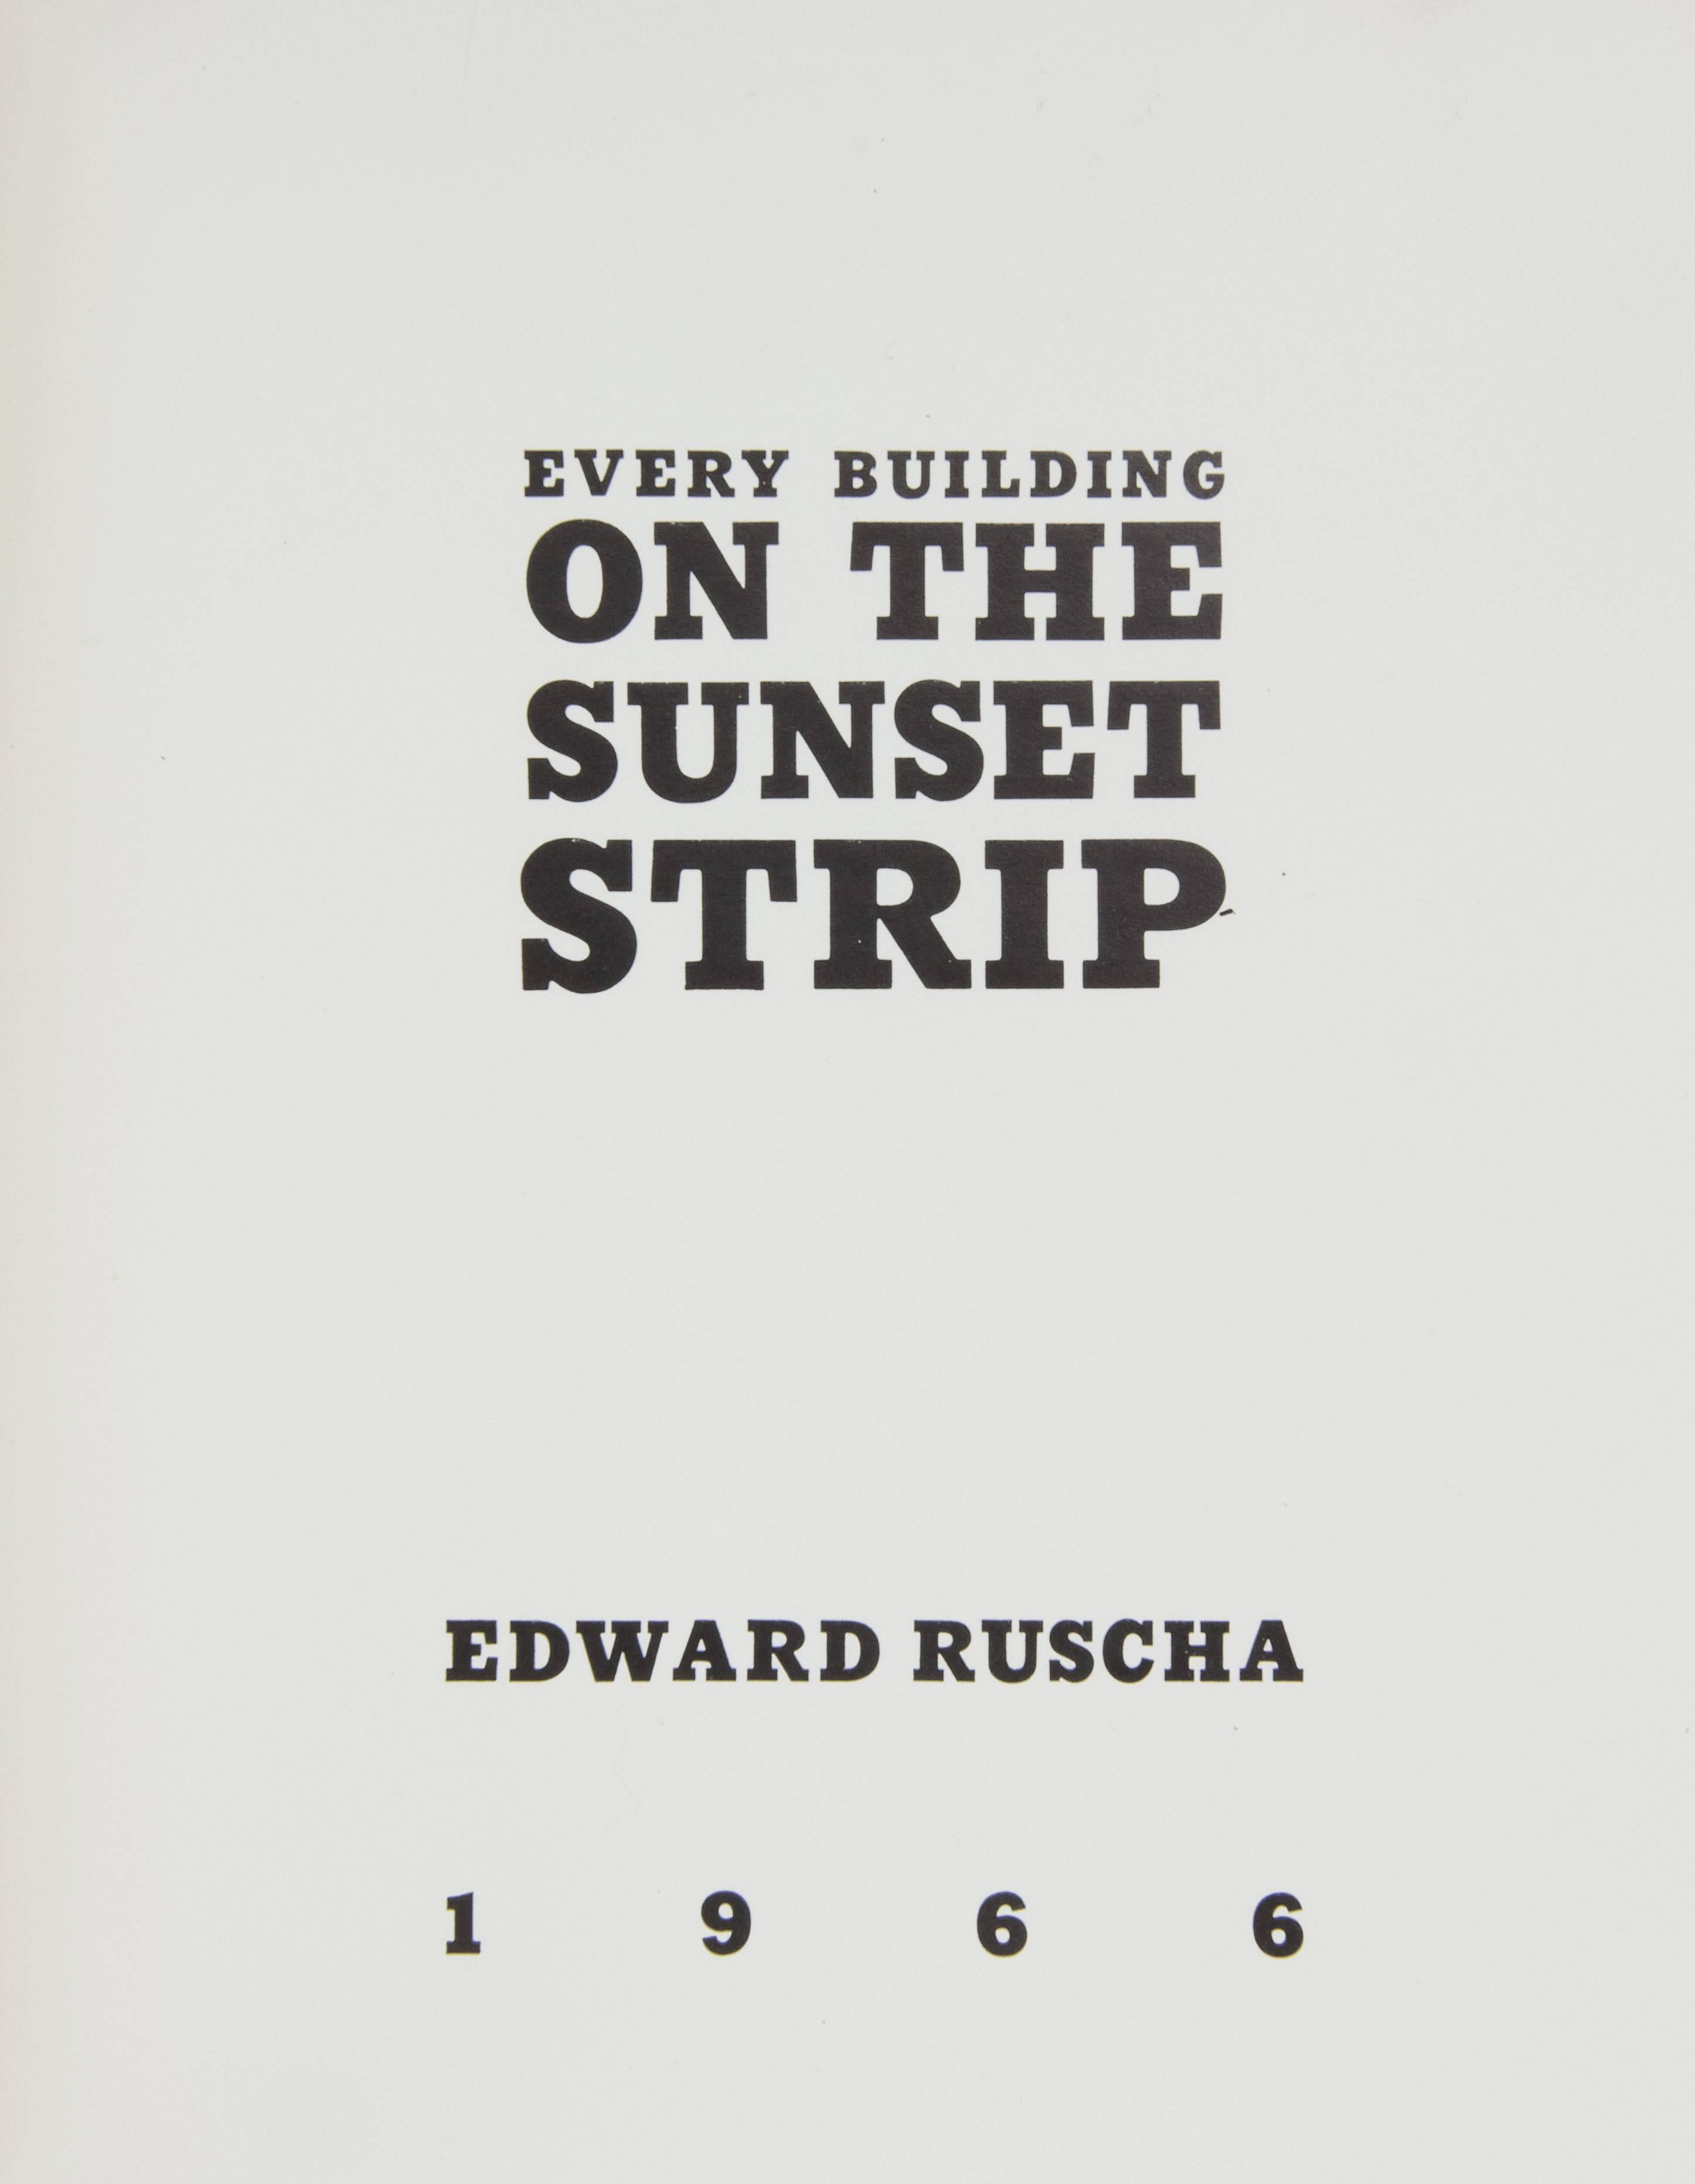 Ed Ruscha Black and White Photograph - EDWARD RUSCHA. Every Building on the Sunset Strip